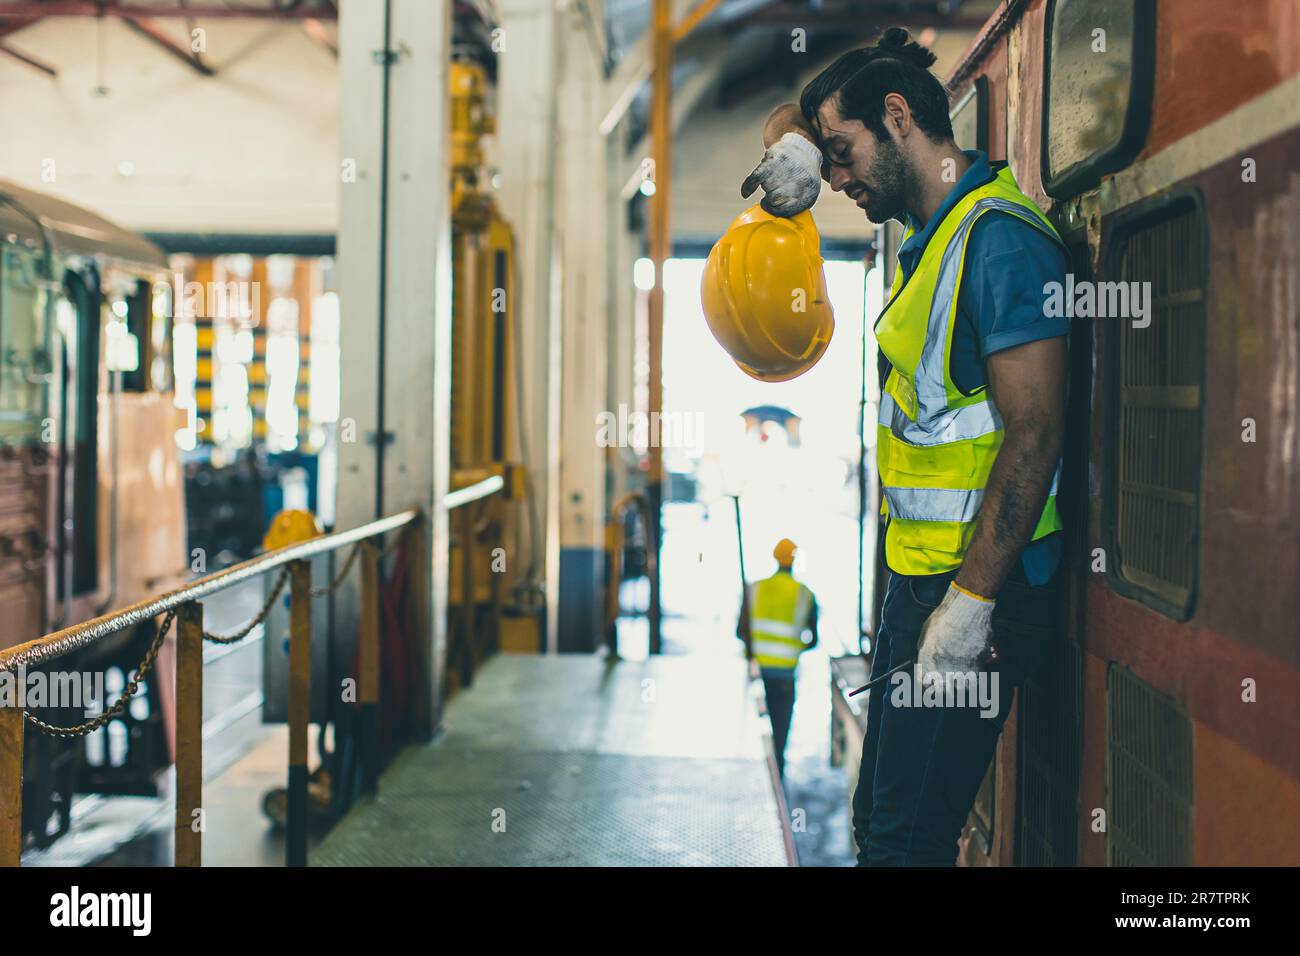 Tired exhausted worker hard work, Locomotive engineer mechanic staff feel fatigue work in train repair shop service station dirty hot workplace machin Stock Photo